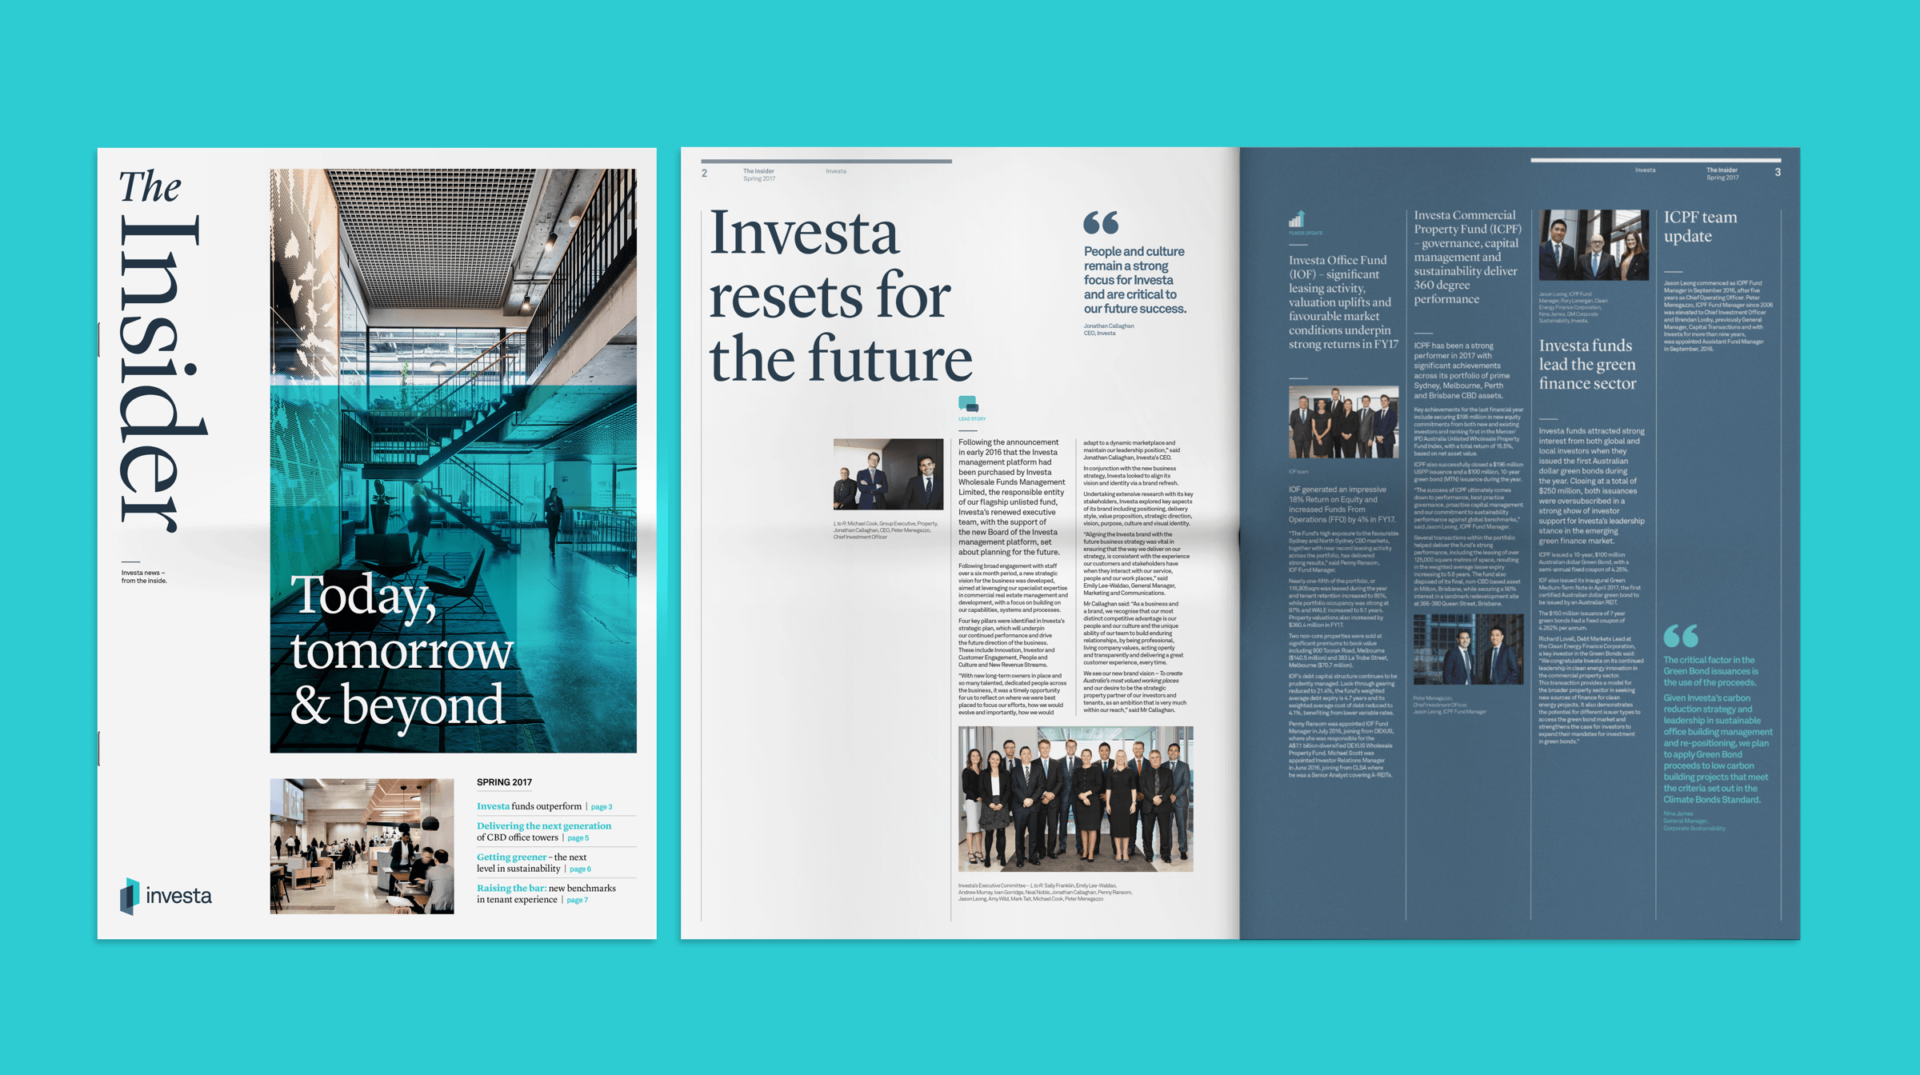 The cover and a spread from the Investa Insider broadsheet